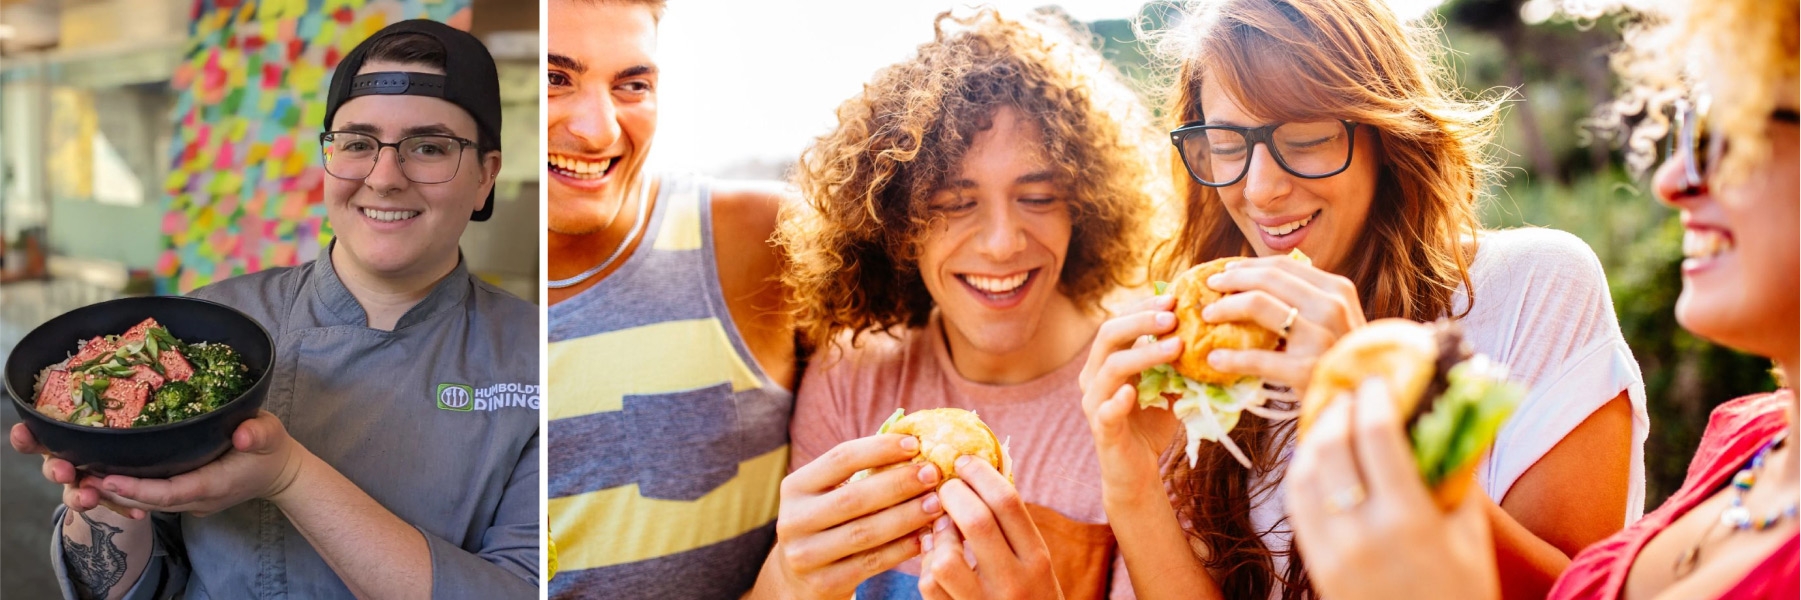 students with smiling faces eating hamburgers